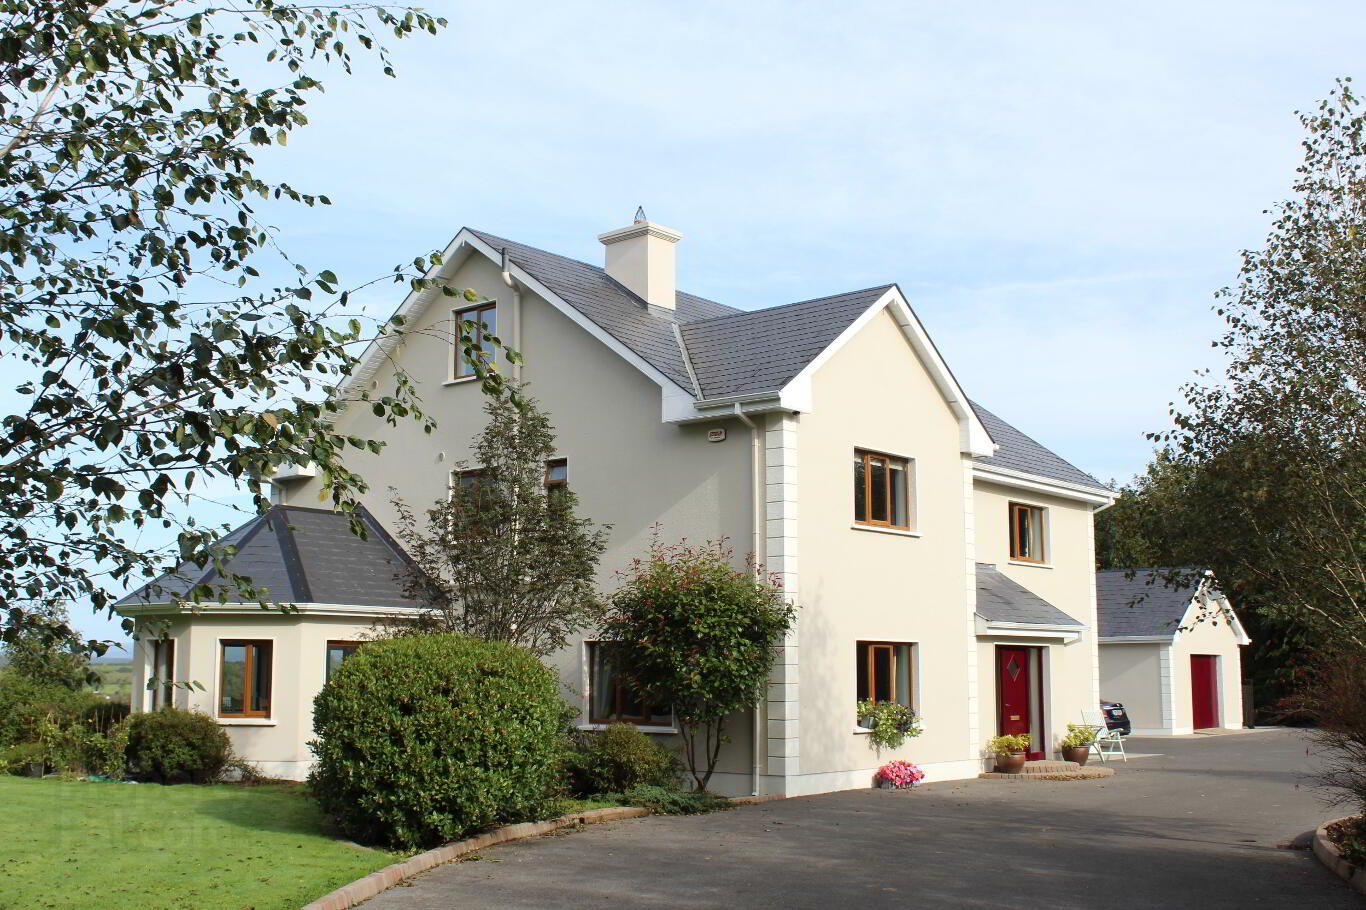 Self Catering Holiday Homes in Carrick-on-Shannon, Co. Leitrim